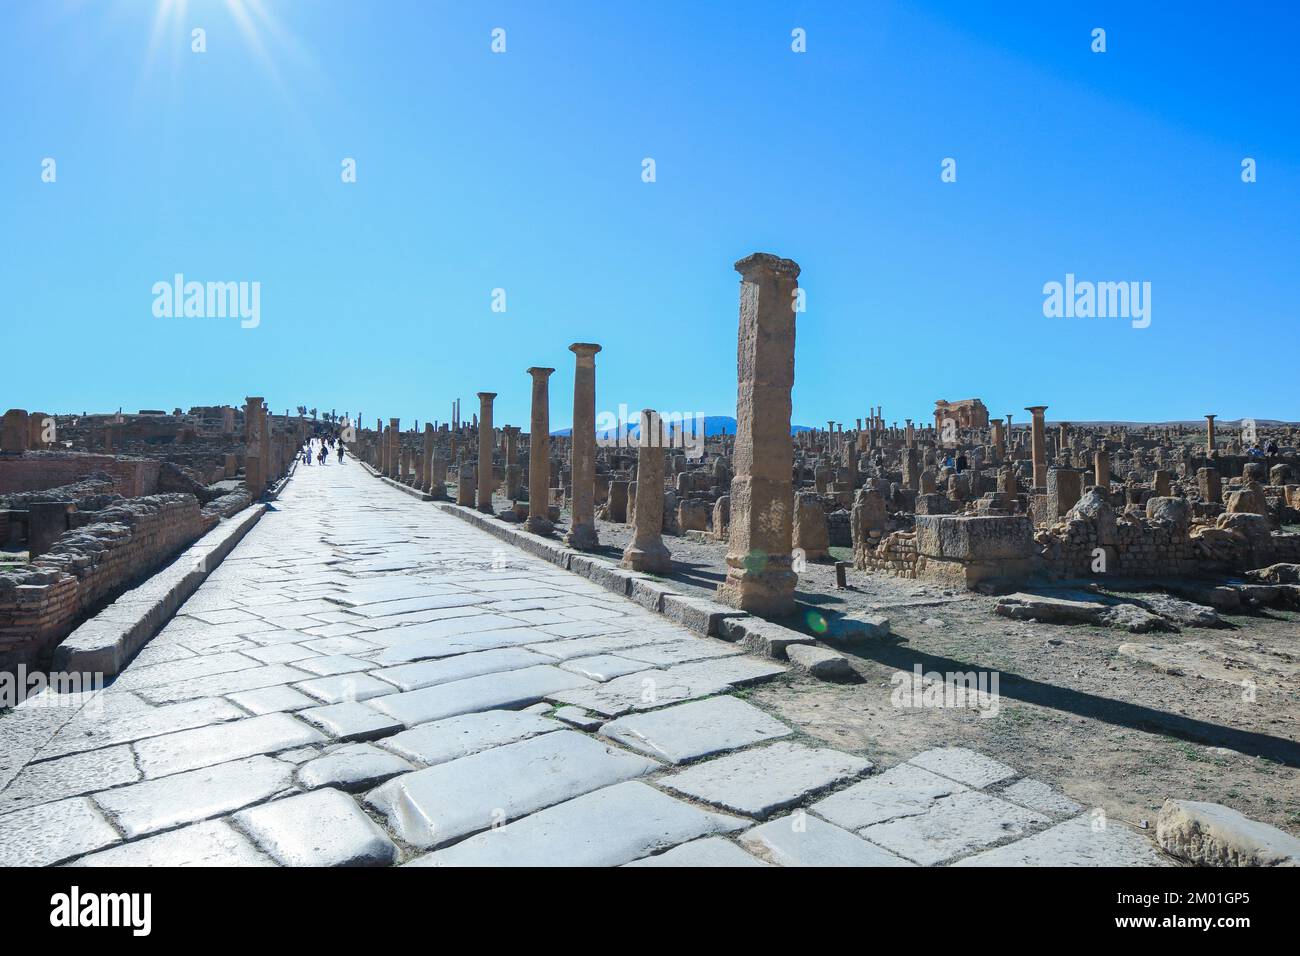 View to the Ruins of an Ancient Roman city Timgad also known as Marciana Traiana Thamugadi in the Aures Mountains, Algeria Stock Photo